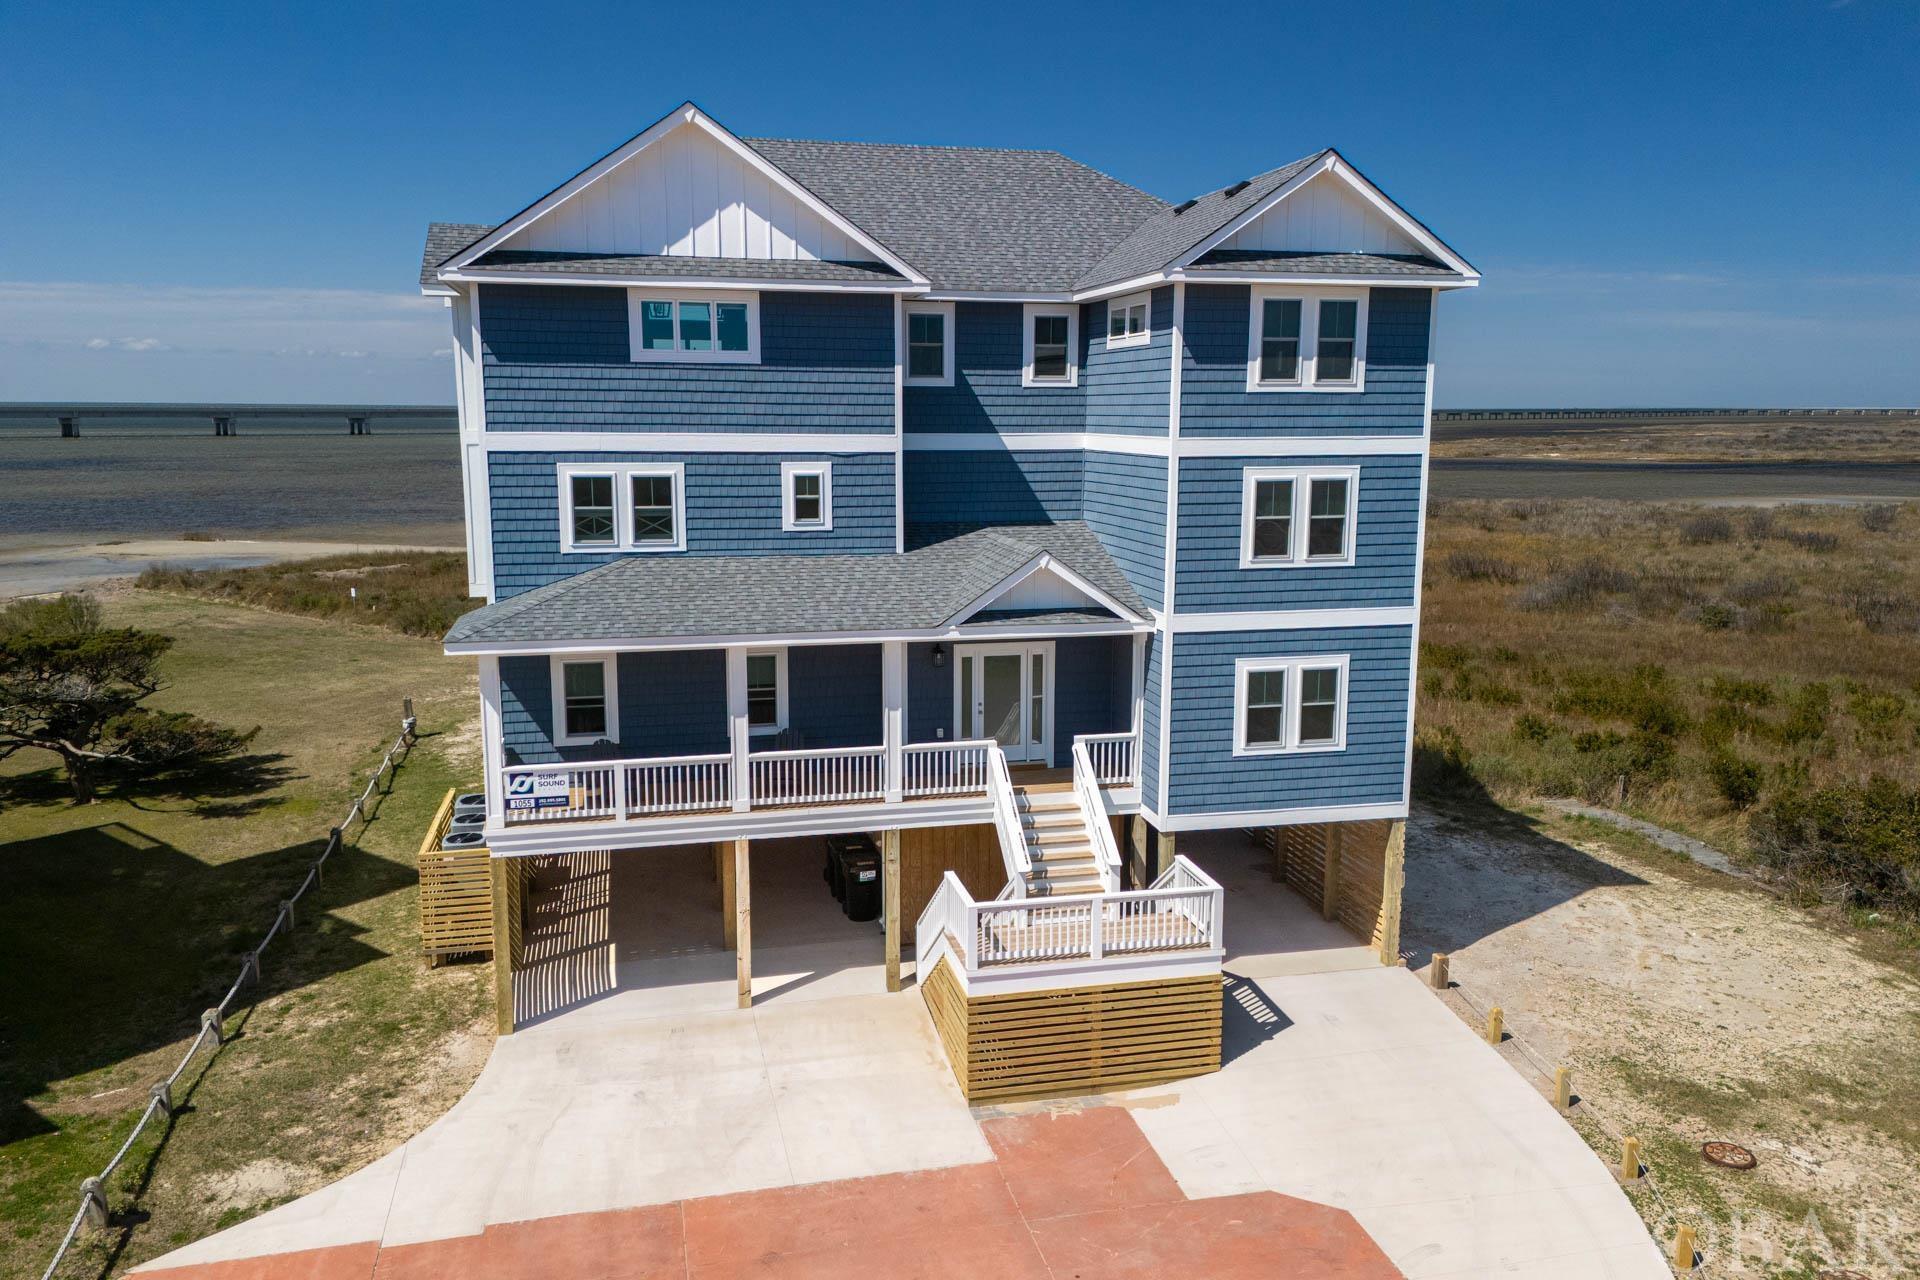 Priceless Views!!  Rare opportunity to own a Luxurious Soundfront Retreat with Panoramic Views!  You can watch the sunrise over the Atlantic and the sunset over the Pamlico sound.  Welcome to your coastal paradise in the serene subdivision of Mirlo Beach in Rodanthe, NC.  Private sandy beach with access to the sound to enjoy all water-sports or just exploring.  Close to the secluded beaches of Mirlo where there is a world class surfing beach and miles of uninhabited beach to enjoy with your family.  This magnificent soundfront home offers a rare and unique opportunity to own a piece of paradise with panoramic 270-degree views of the ocean, sound, and adjacent Pea Island National Wildlife Refuge.  There is a water view from every window.  Situated on a sprawling 28,000 square foot lot, this stunning property boasts 9 bedrooms, 9 full bathrooms, and 2 half baths spread across approximately 5100 square feet of living space.  Each bedroom features its own private bathroom and smart TV, ensuring comfort and convenience for all guests.  Step inside to discover a meticulously designed interior, featuring upgraded bathrooms with beautiful tile showers, luxury vinyl plank flooring throughout and an open concept living area with high vaulted ceilings and expansive water views.  The gourmet kitchen is a chef's dream, complete with quartz counters and backsplash, double refrigerators, double wall oven, stove top, and double dishwashers.  Entertain guests in style with three levels of decks facing the water, a private pool and hot tub, outdoor showers, and a game room equipped with a pool table and wet bar. Movie nights will be unforgettable in the home's theater room, while the nearby community courts offer tennis and pickleball for outdoor enthusiasts.  With its coastal design and abundance of decks and gathering areas, this property is the epitome of luxury beach living.  Built in 2022, this amazing home was built by Sandalwood Construction who is a premier builder with over 40 years experience designing and building fine homes on the Outer Banks.  This property is built to a standard for achieving low maintenance for the homeowner.  The builder combined roof shingles, exterior siding, composite trim, windows, doors and construction techniques that collectively create a product that will stand up to the elements and be a sustainable home for years to come!  The new bridge routes traffic around Mirlo Beach creating a new and improved 'north end' of Rodanthe that will have no through traffic. No more busy streets to cross when you are going to the beach! This is an incredible location for your dream 2nd home or investment home. Enjoy everything that Hatteras Island has to offer such as pristine uncrowded beaches, world class kite boarding and surfing, fishing and amazing local restaurants and fresh seafood.  This home is not your ordinary investment property.  It is a fine home that blends a once in a lifetime location and high quality construction for the most discriminating of buyers.  Don't miss your chance to own this extraordinary soundfront retreat in Rodanthe!